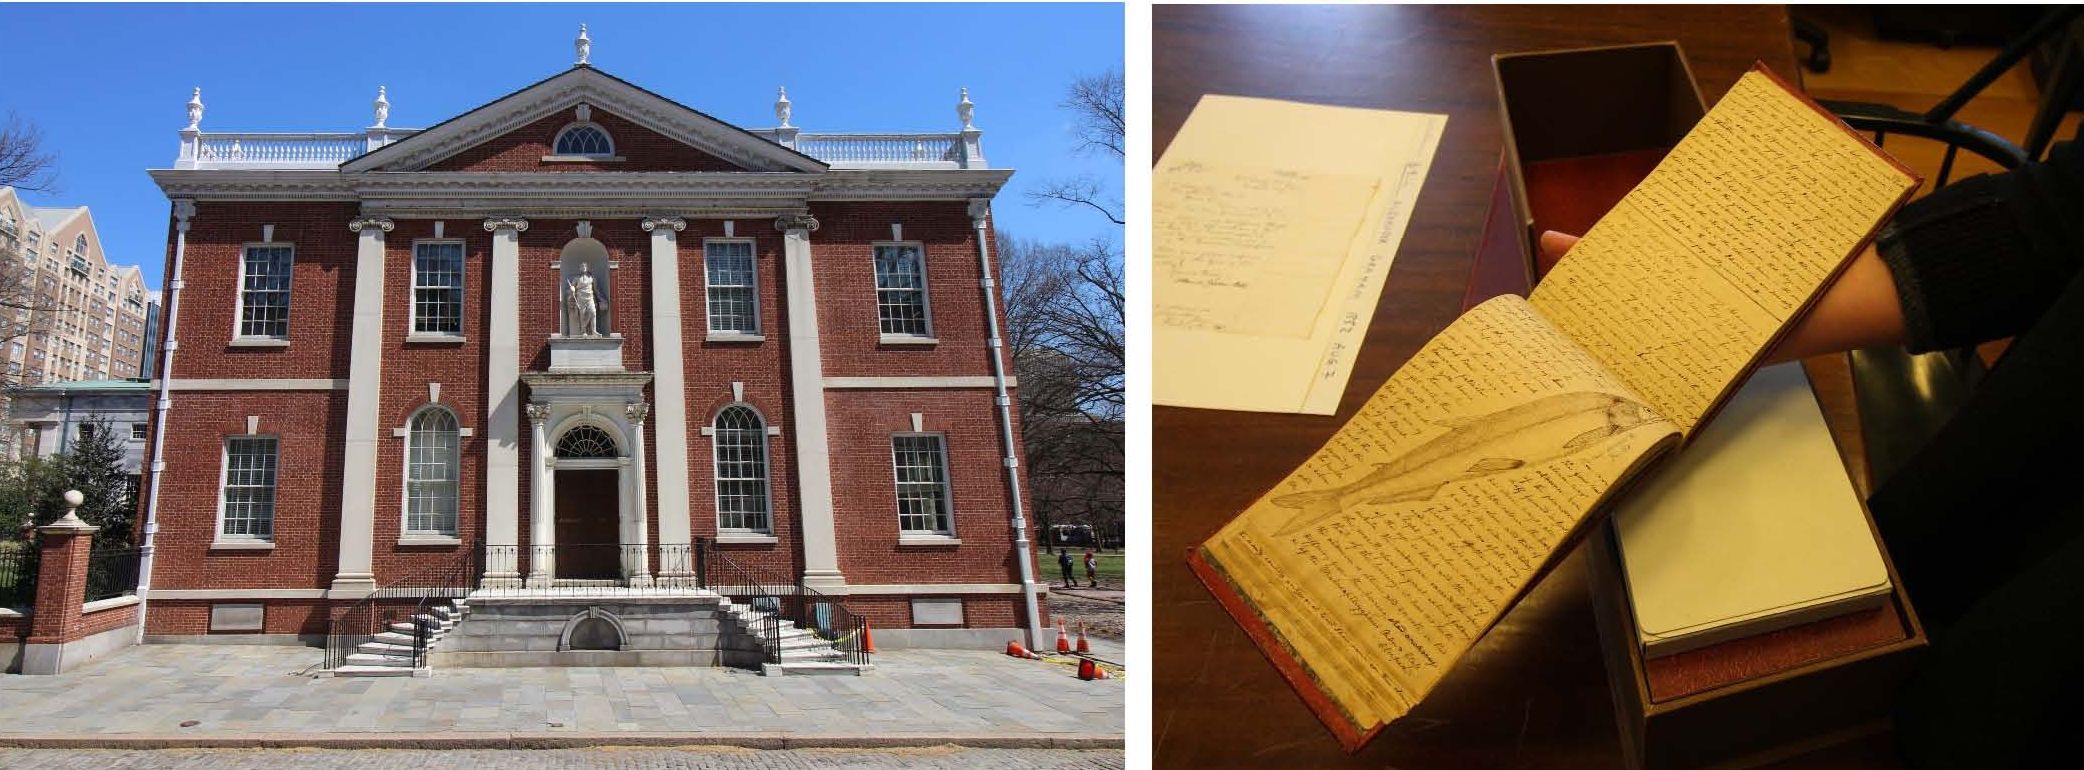 The rich collections at the American Philosophical Society include original journals of Lewis and Clark. Photos by Edwin Grosvenor.